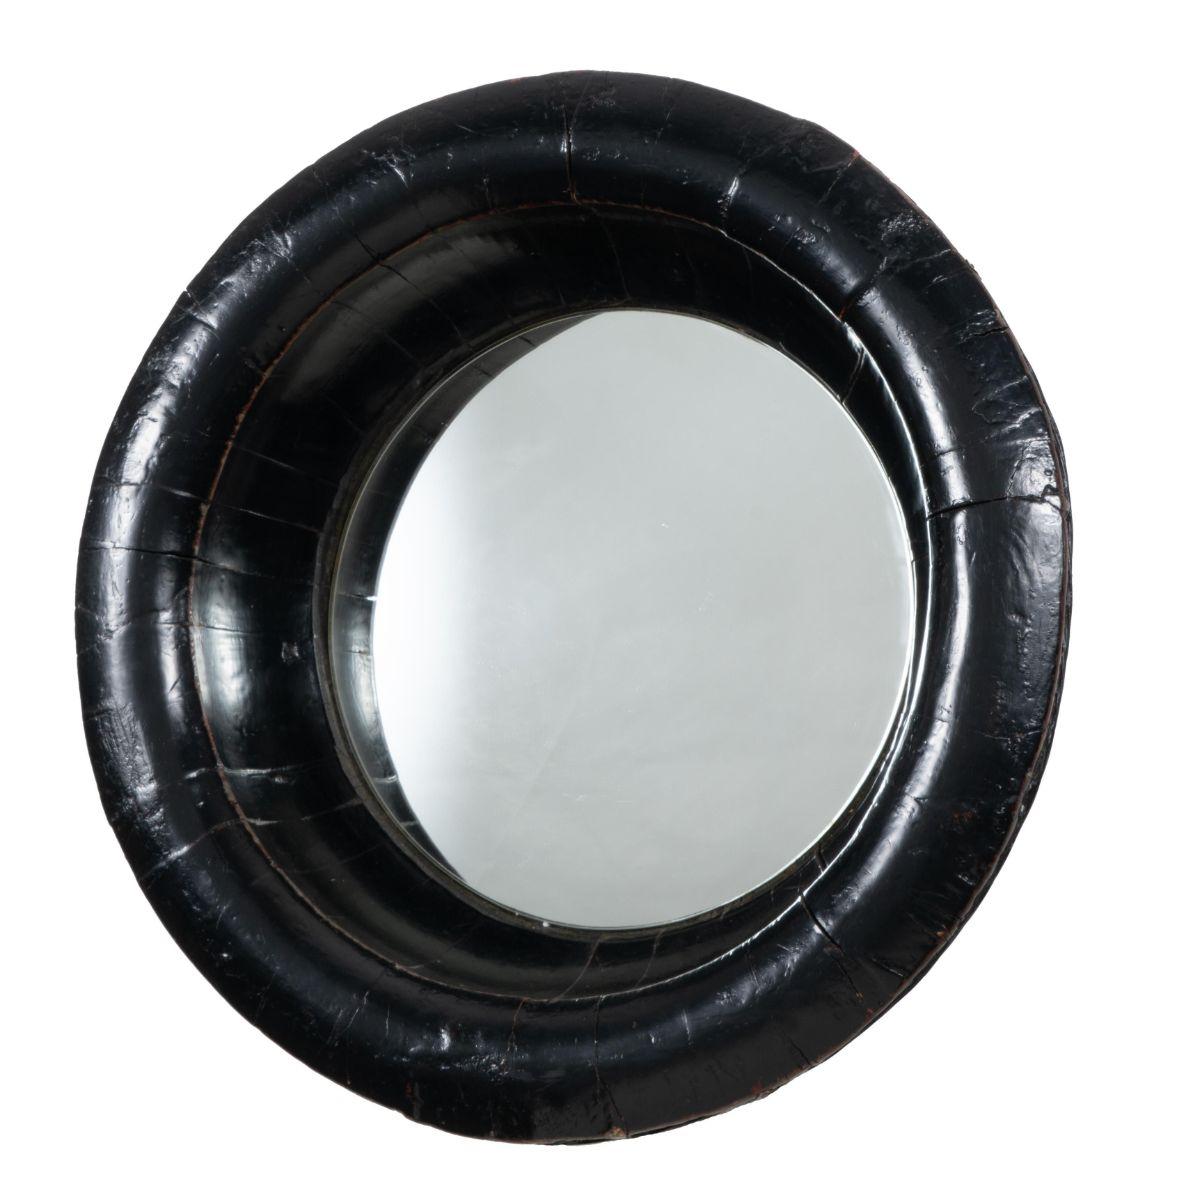 Circular basin of stave constructed black lacquered wood and fitted with mirror.
China, 19th century.